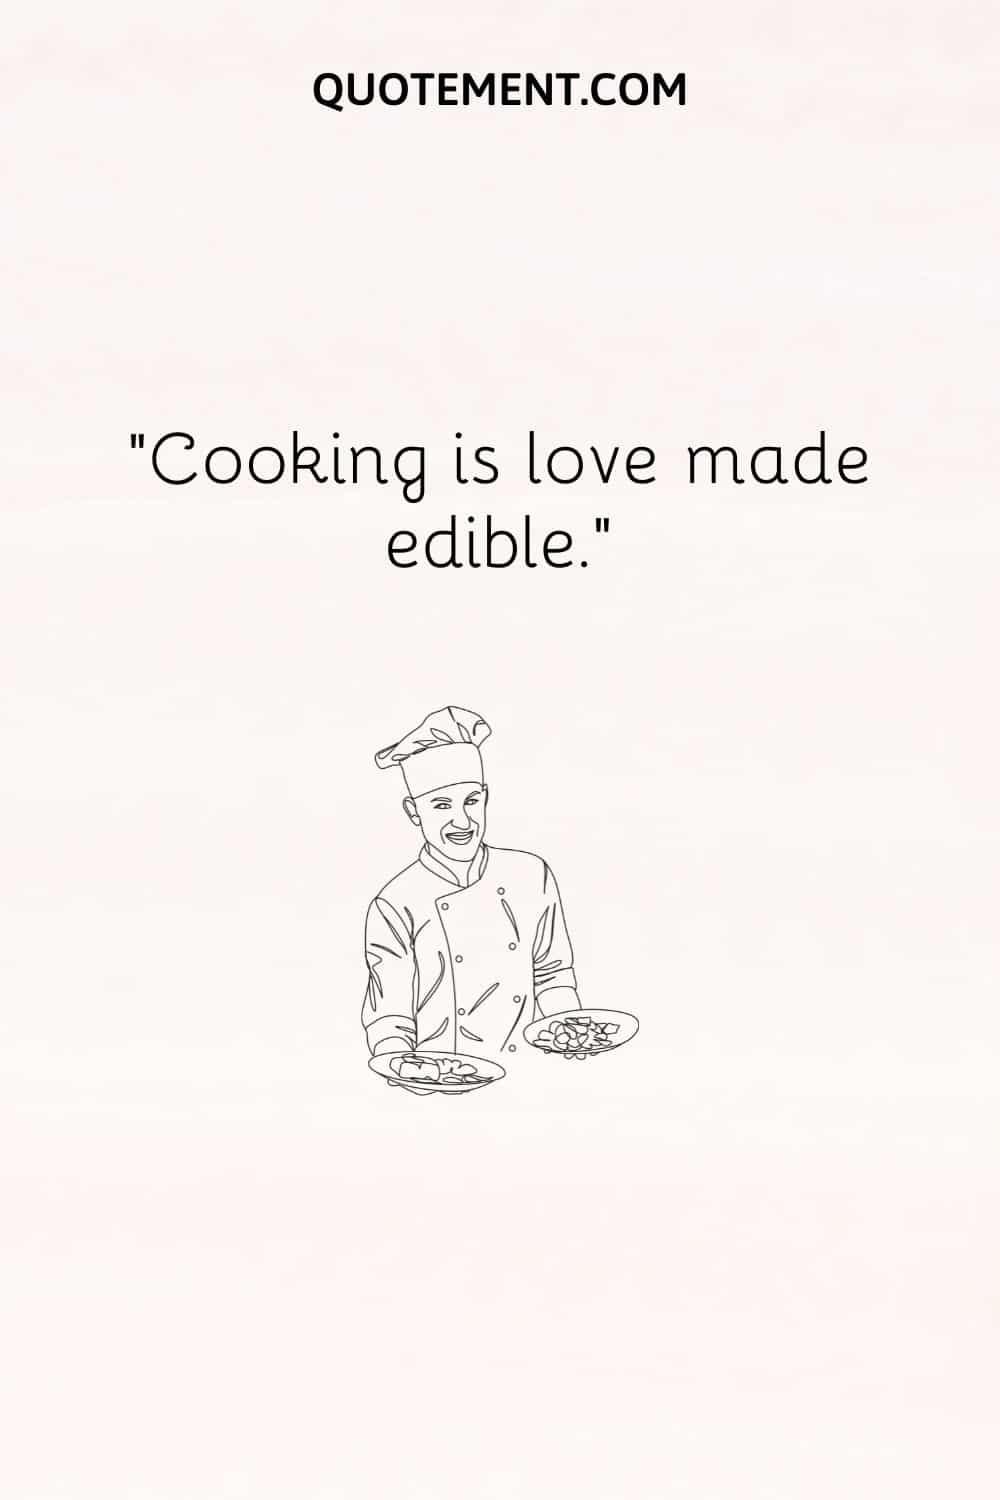 Cooking is love made edible